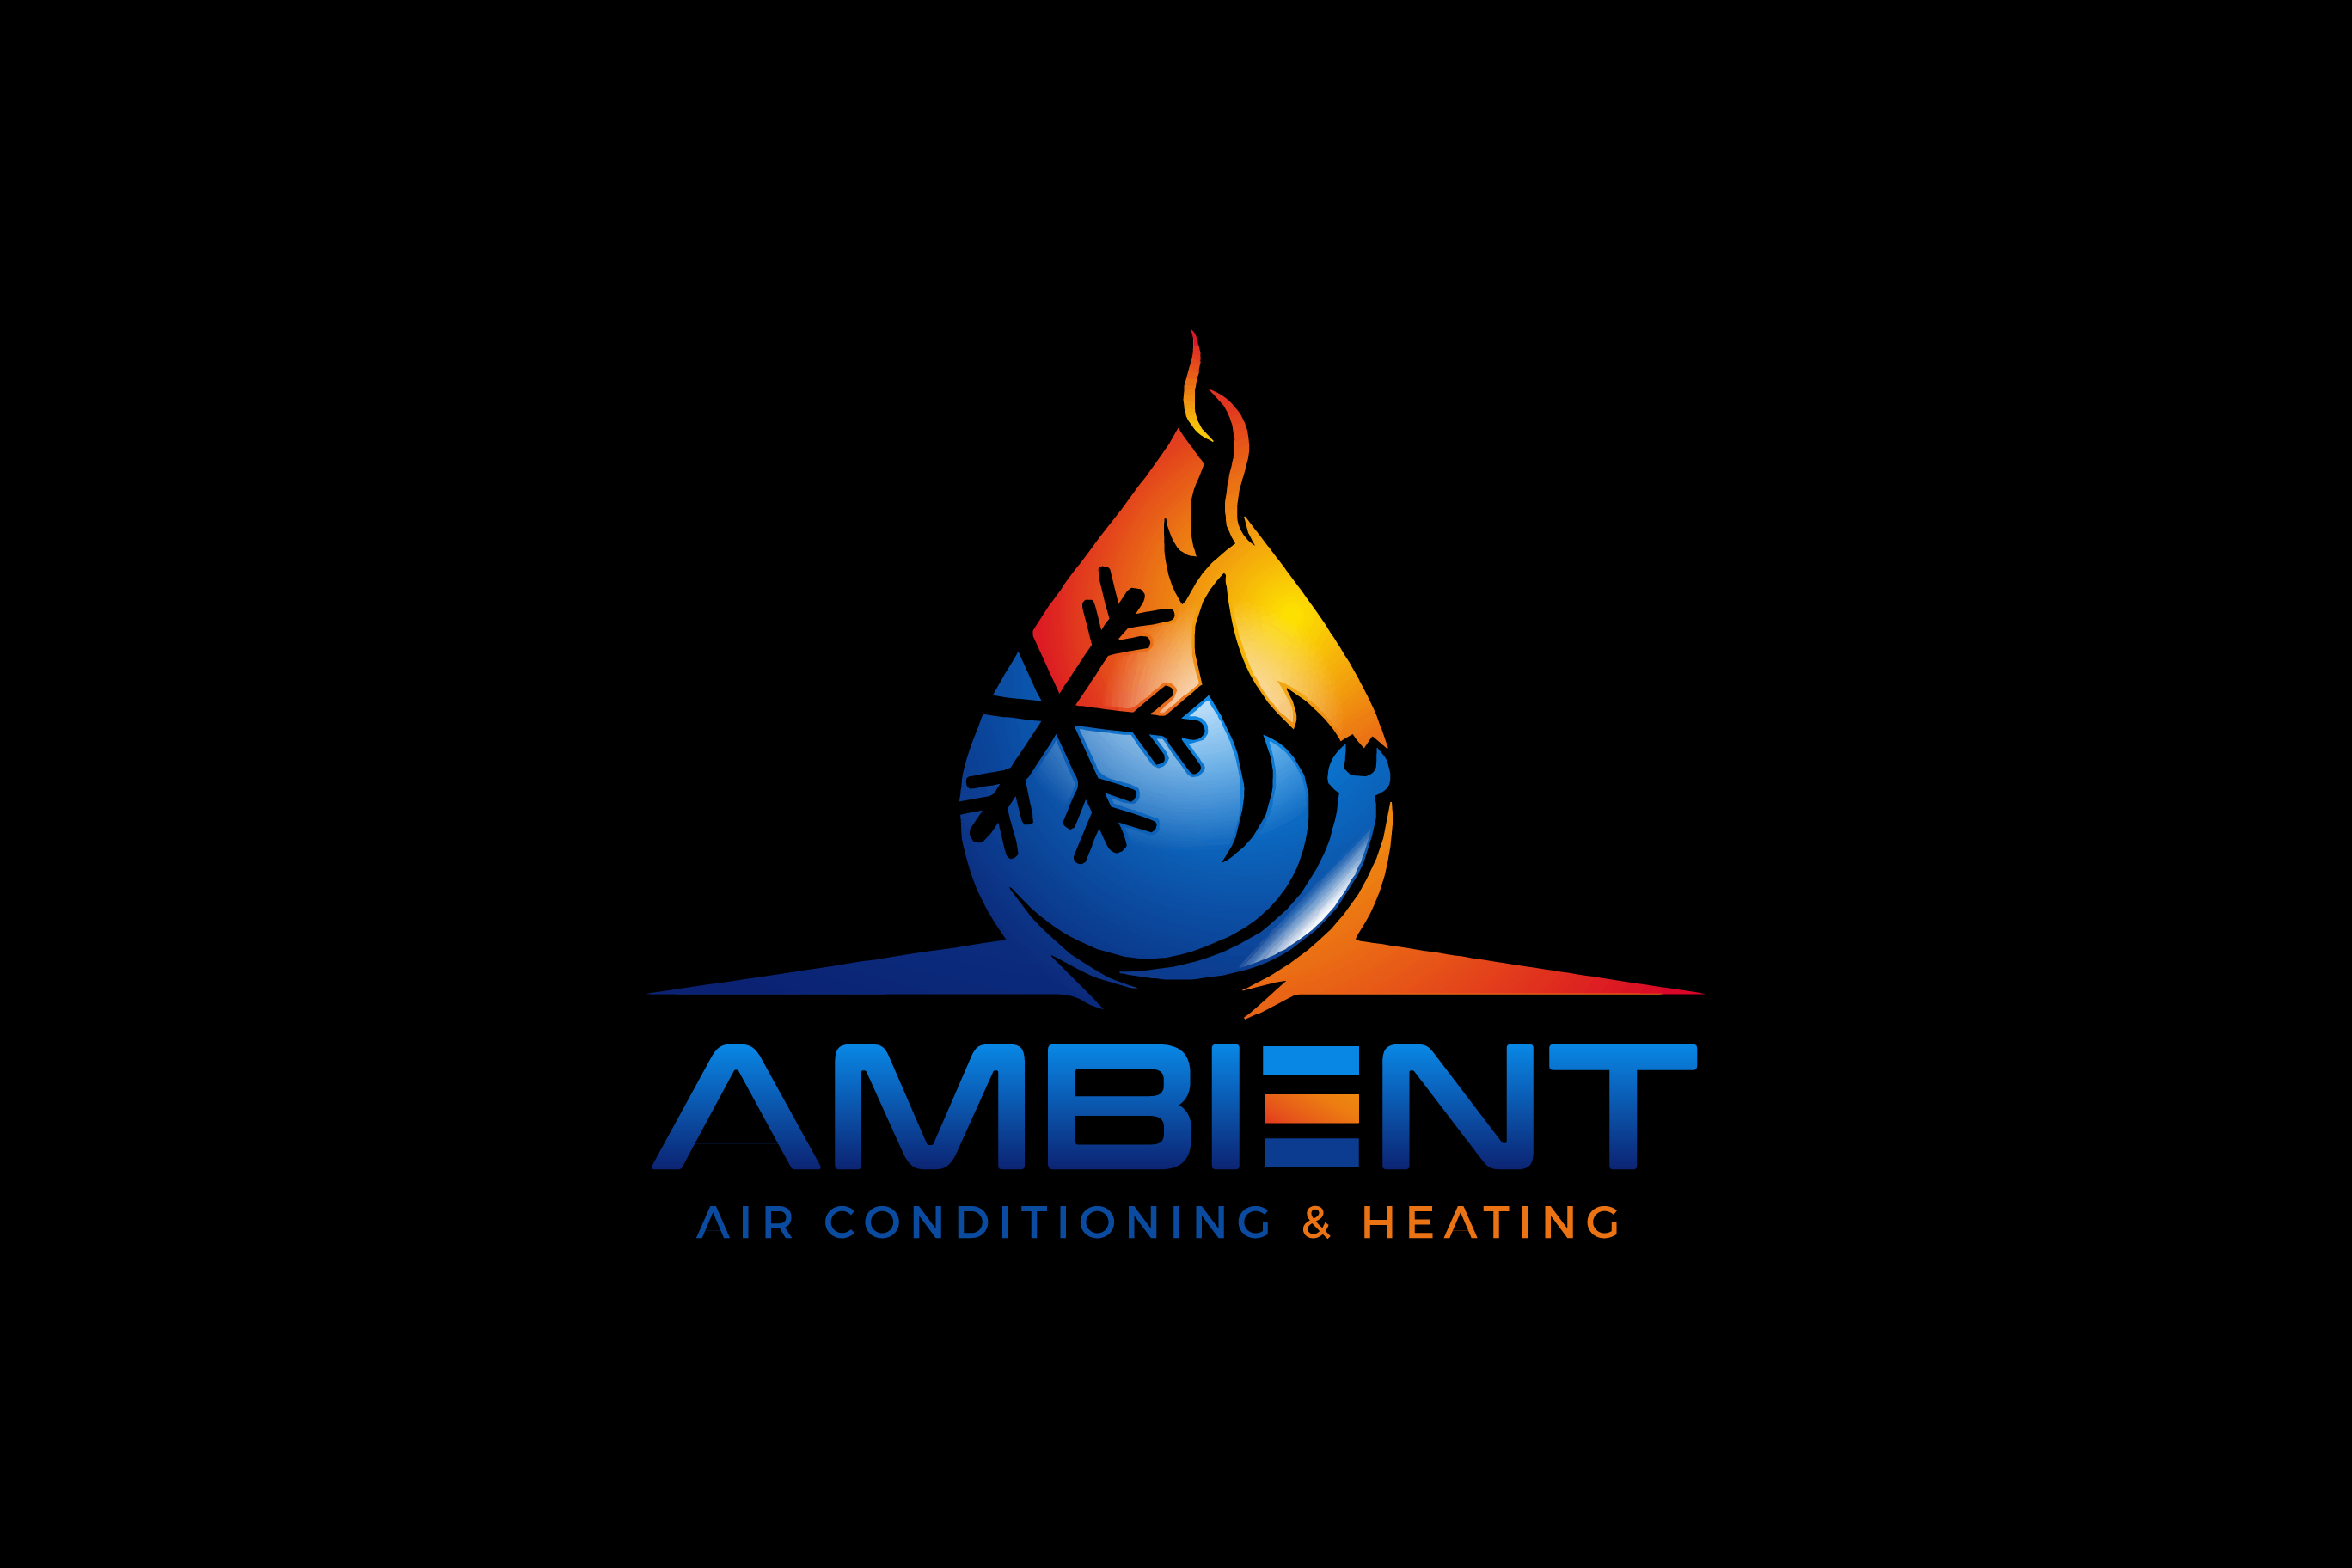 Ambient Air Conditioning & Heating Inc Logo